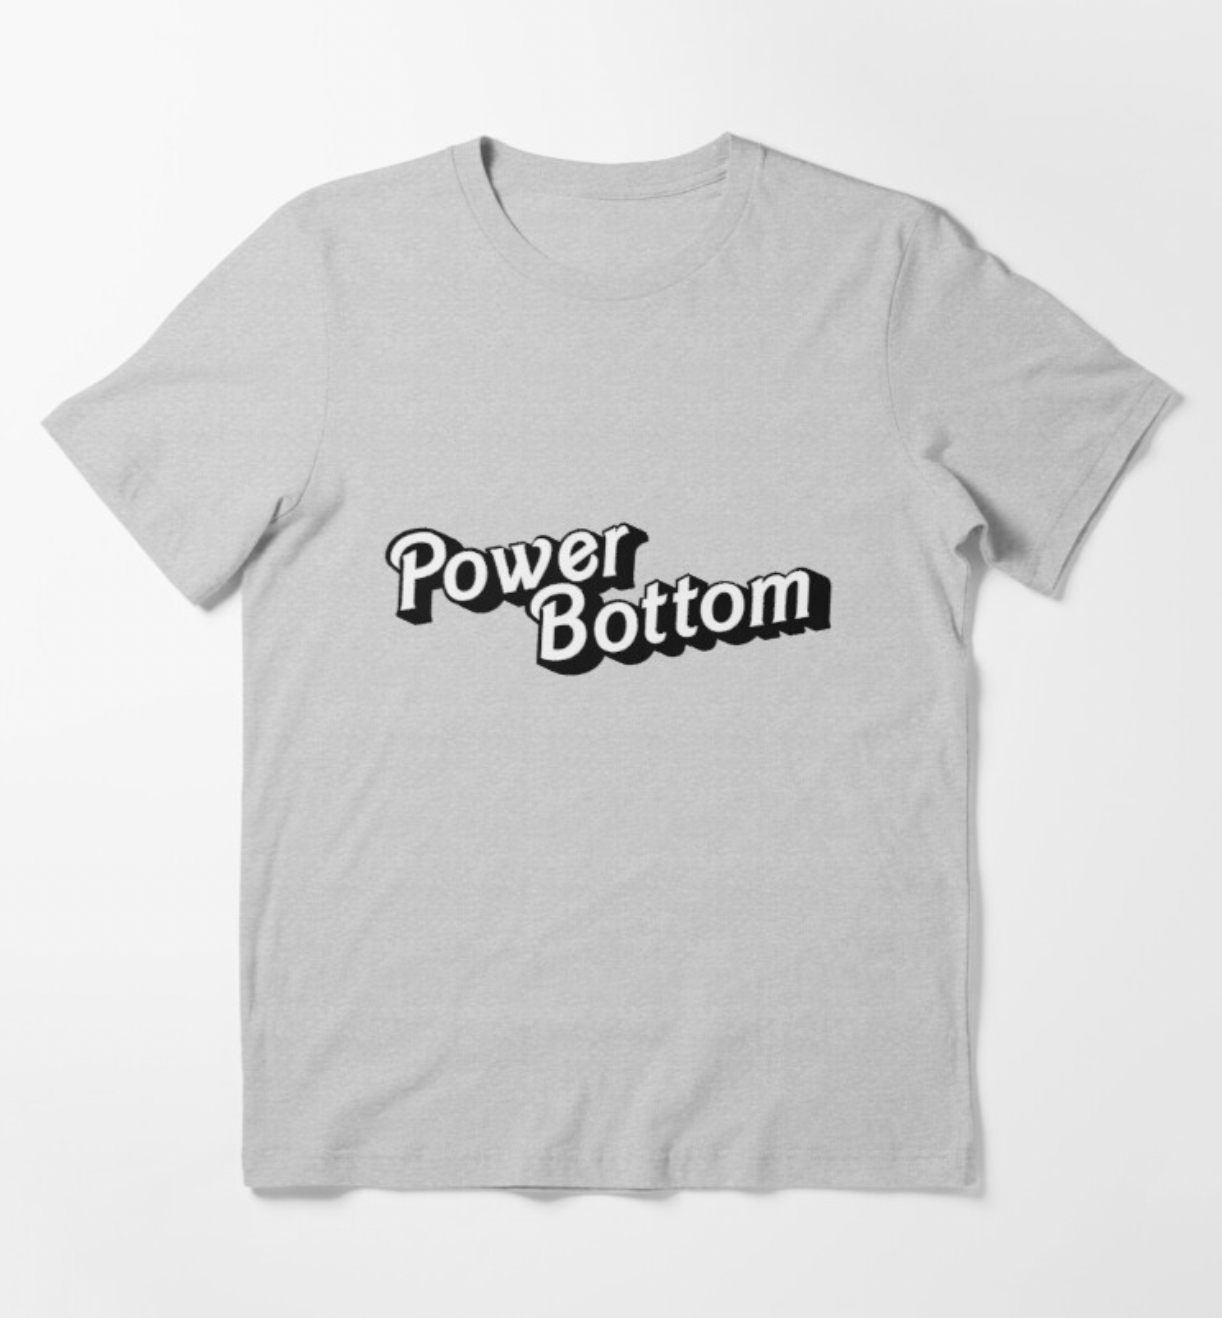 'Power Bottom' Shirt - 45.00 with free shipping on Gays+ Store 